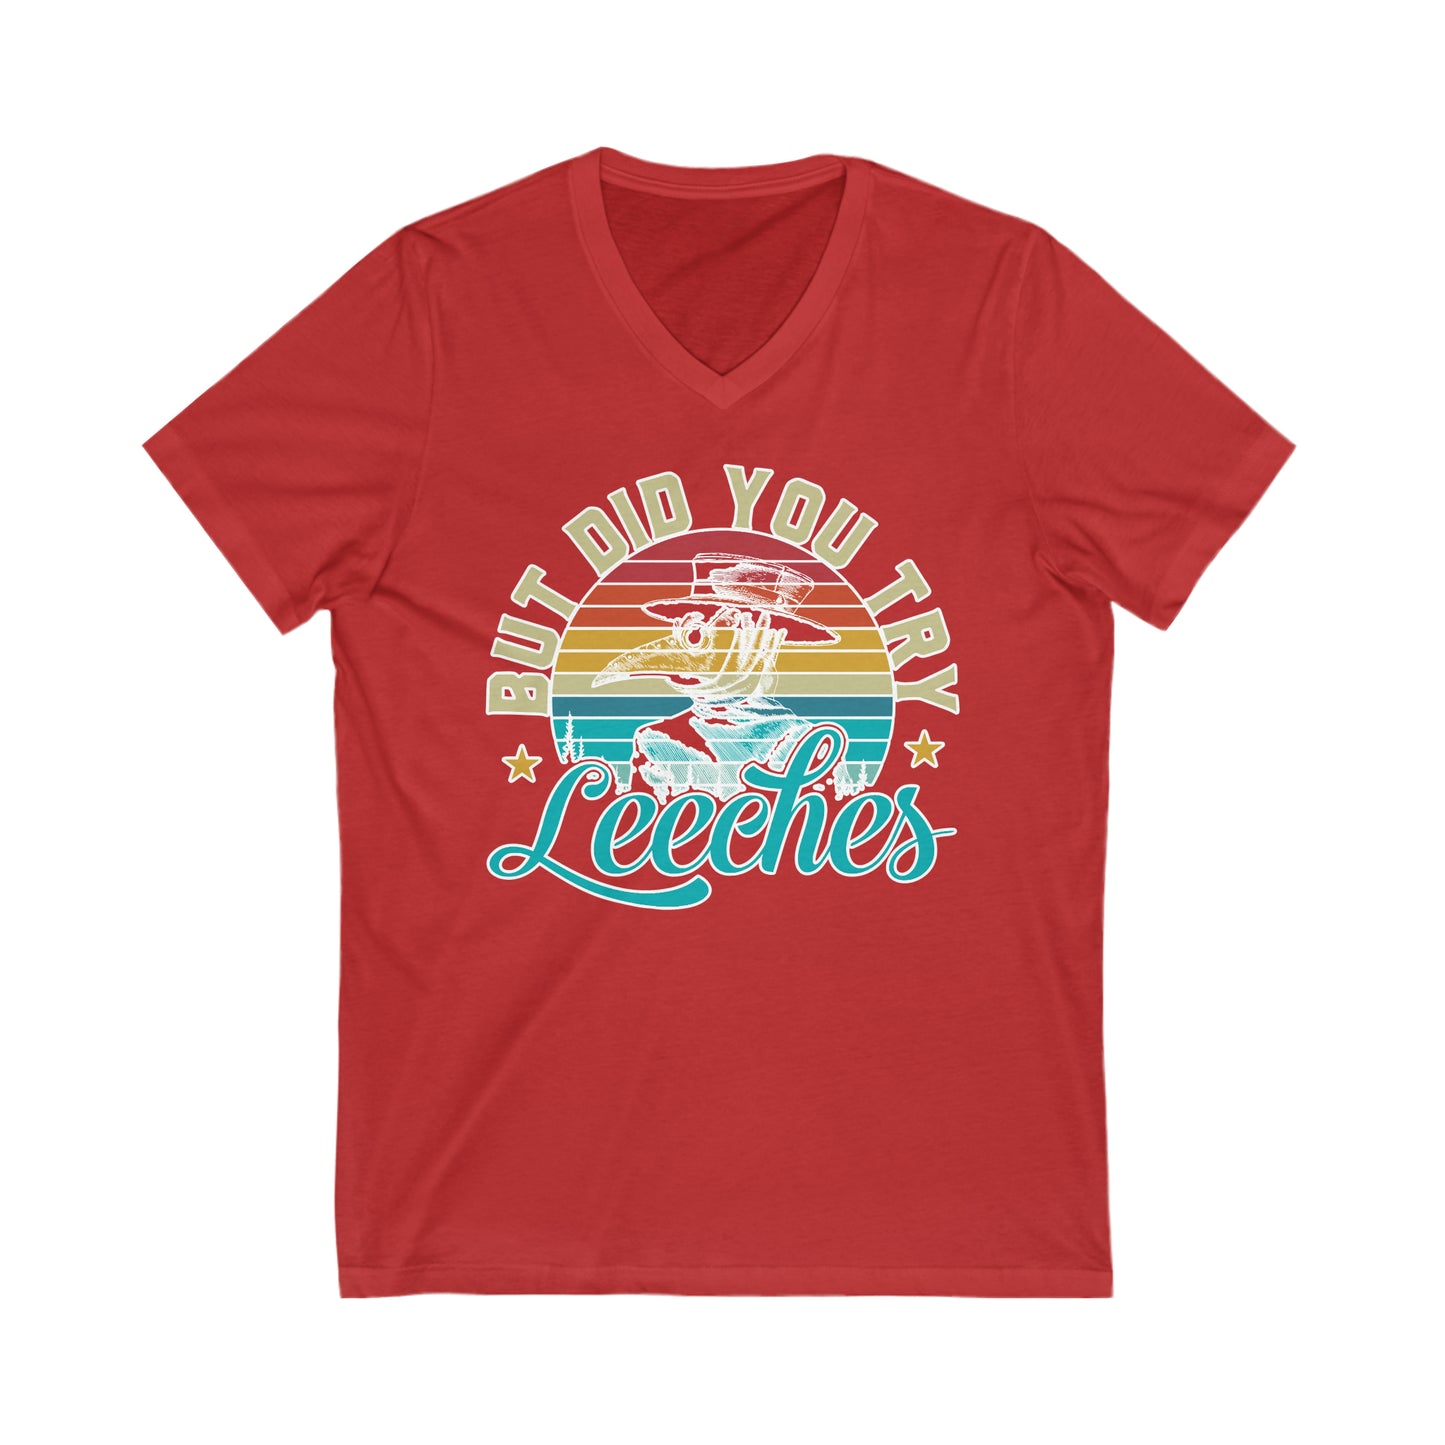 But Did You Try Leeches: Unisex Jersey Short Sleeve V-Neck Tee